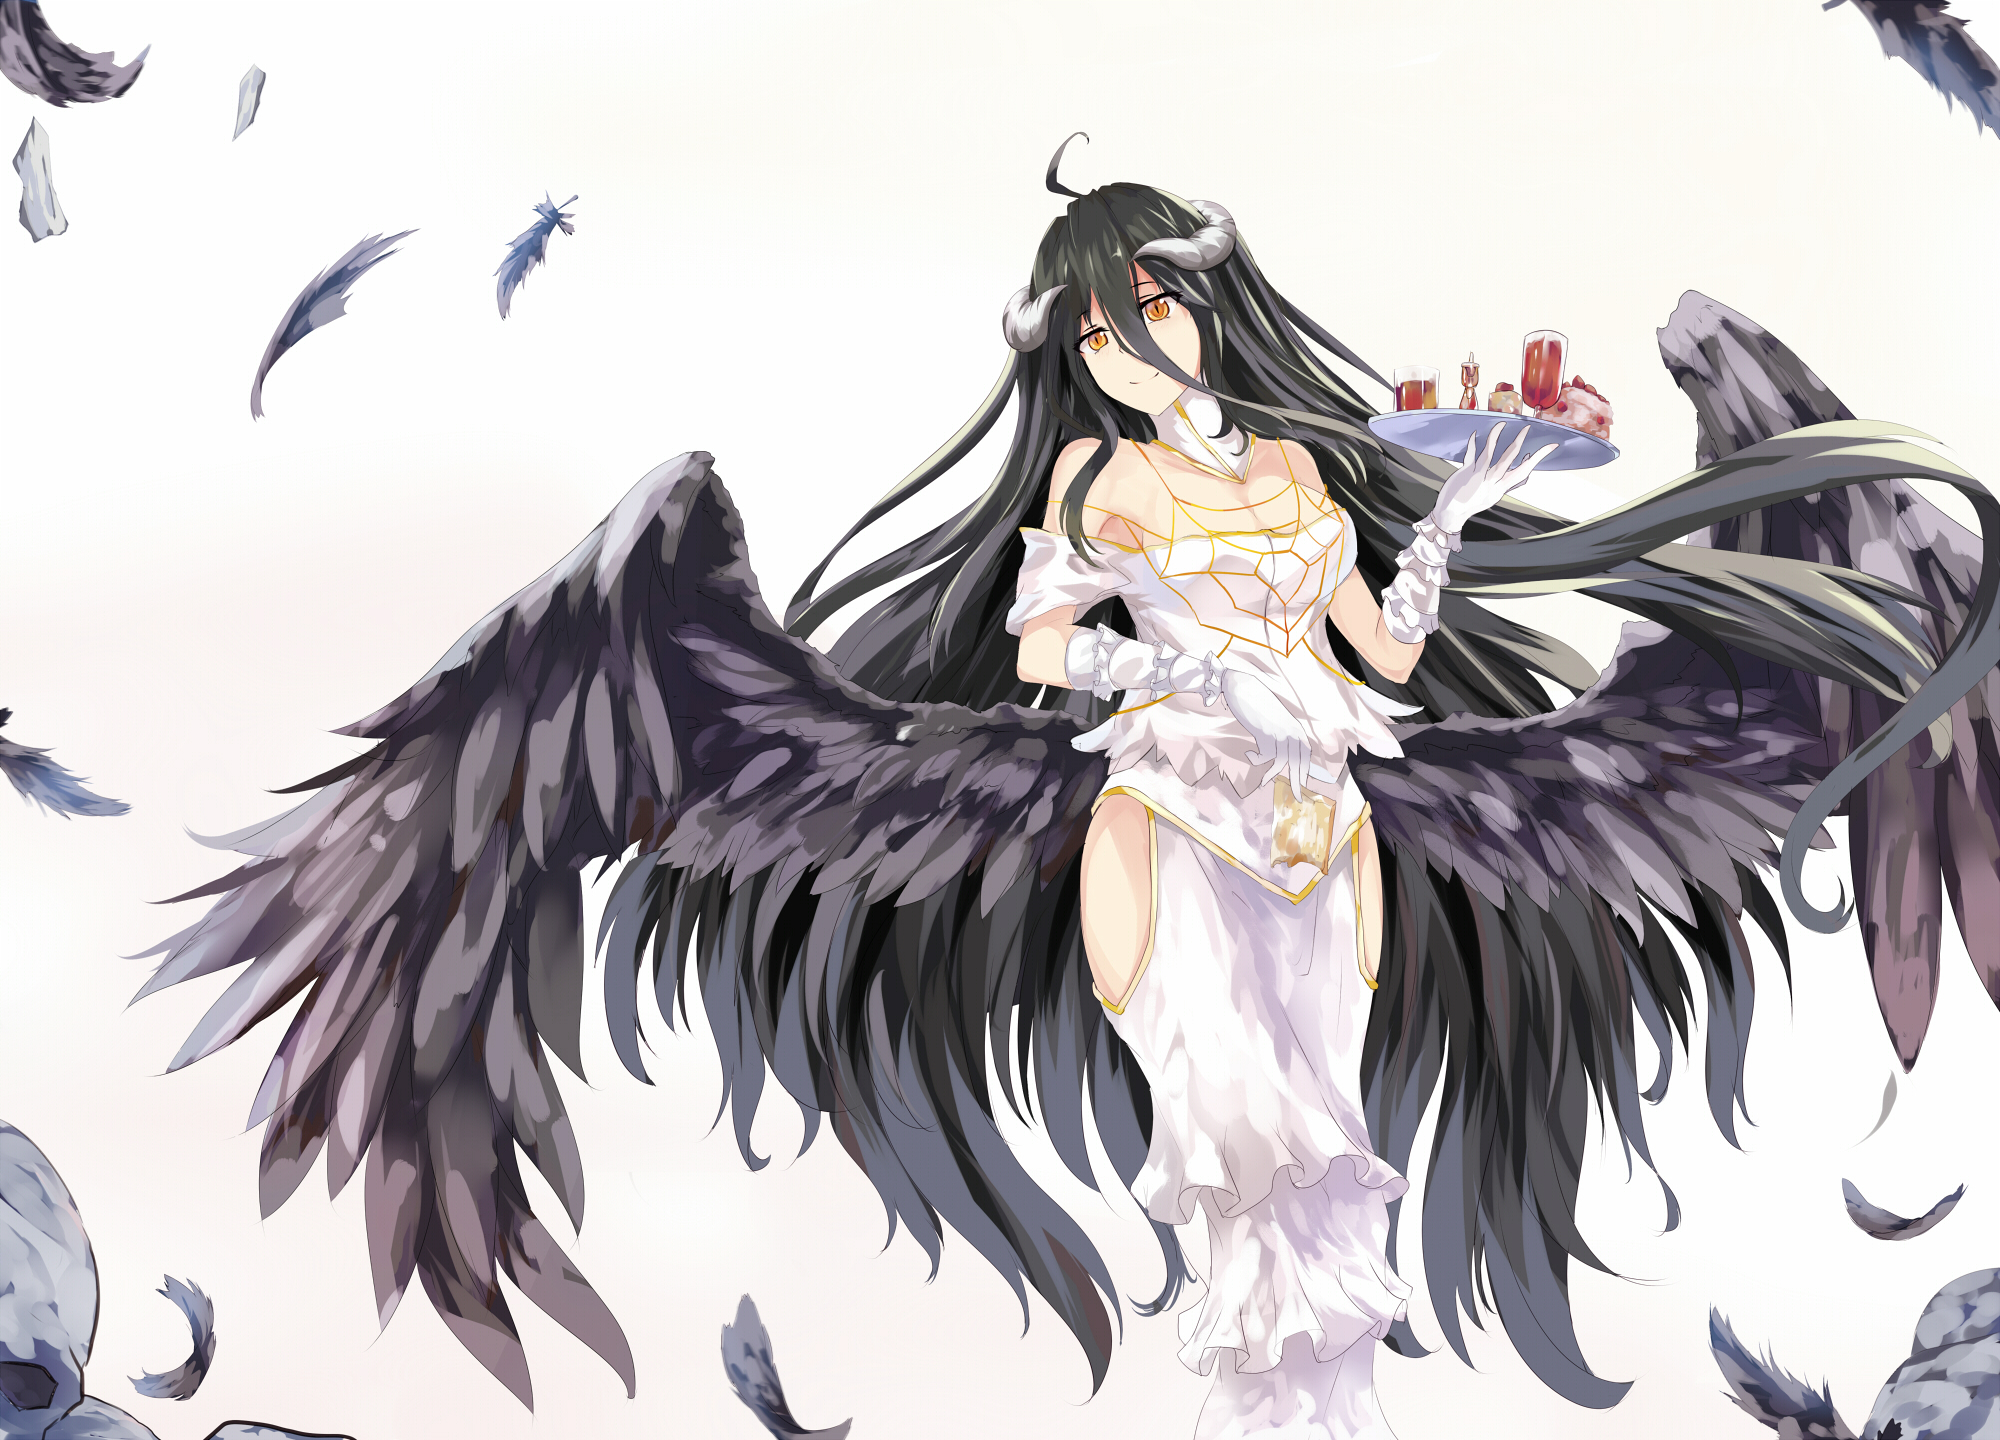 Free Download Anime Overlord Overlord Albedo Wallpaper 00x1440 For Your Desktop Mobile Tablet Explore 49 Overlord Albedo Wallpaper Overlord Anime Wallpaper Overlord Anime Albedo Wallpaper